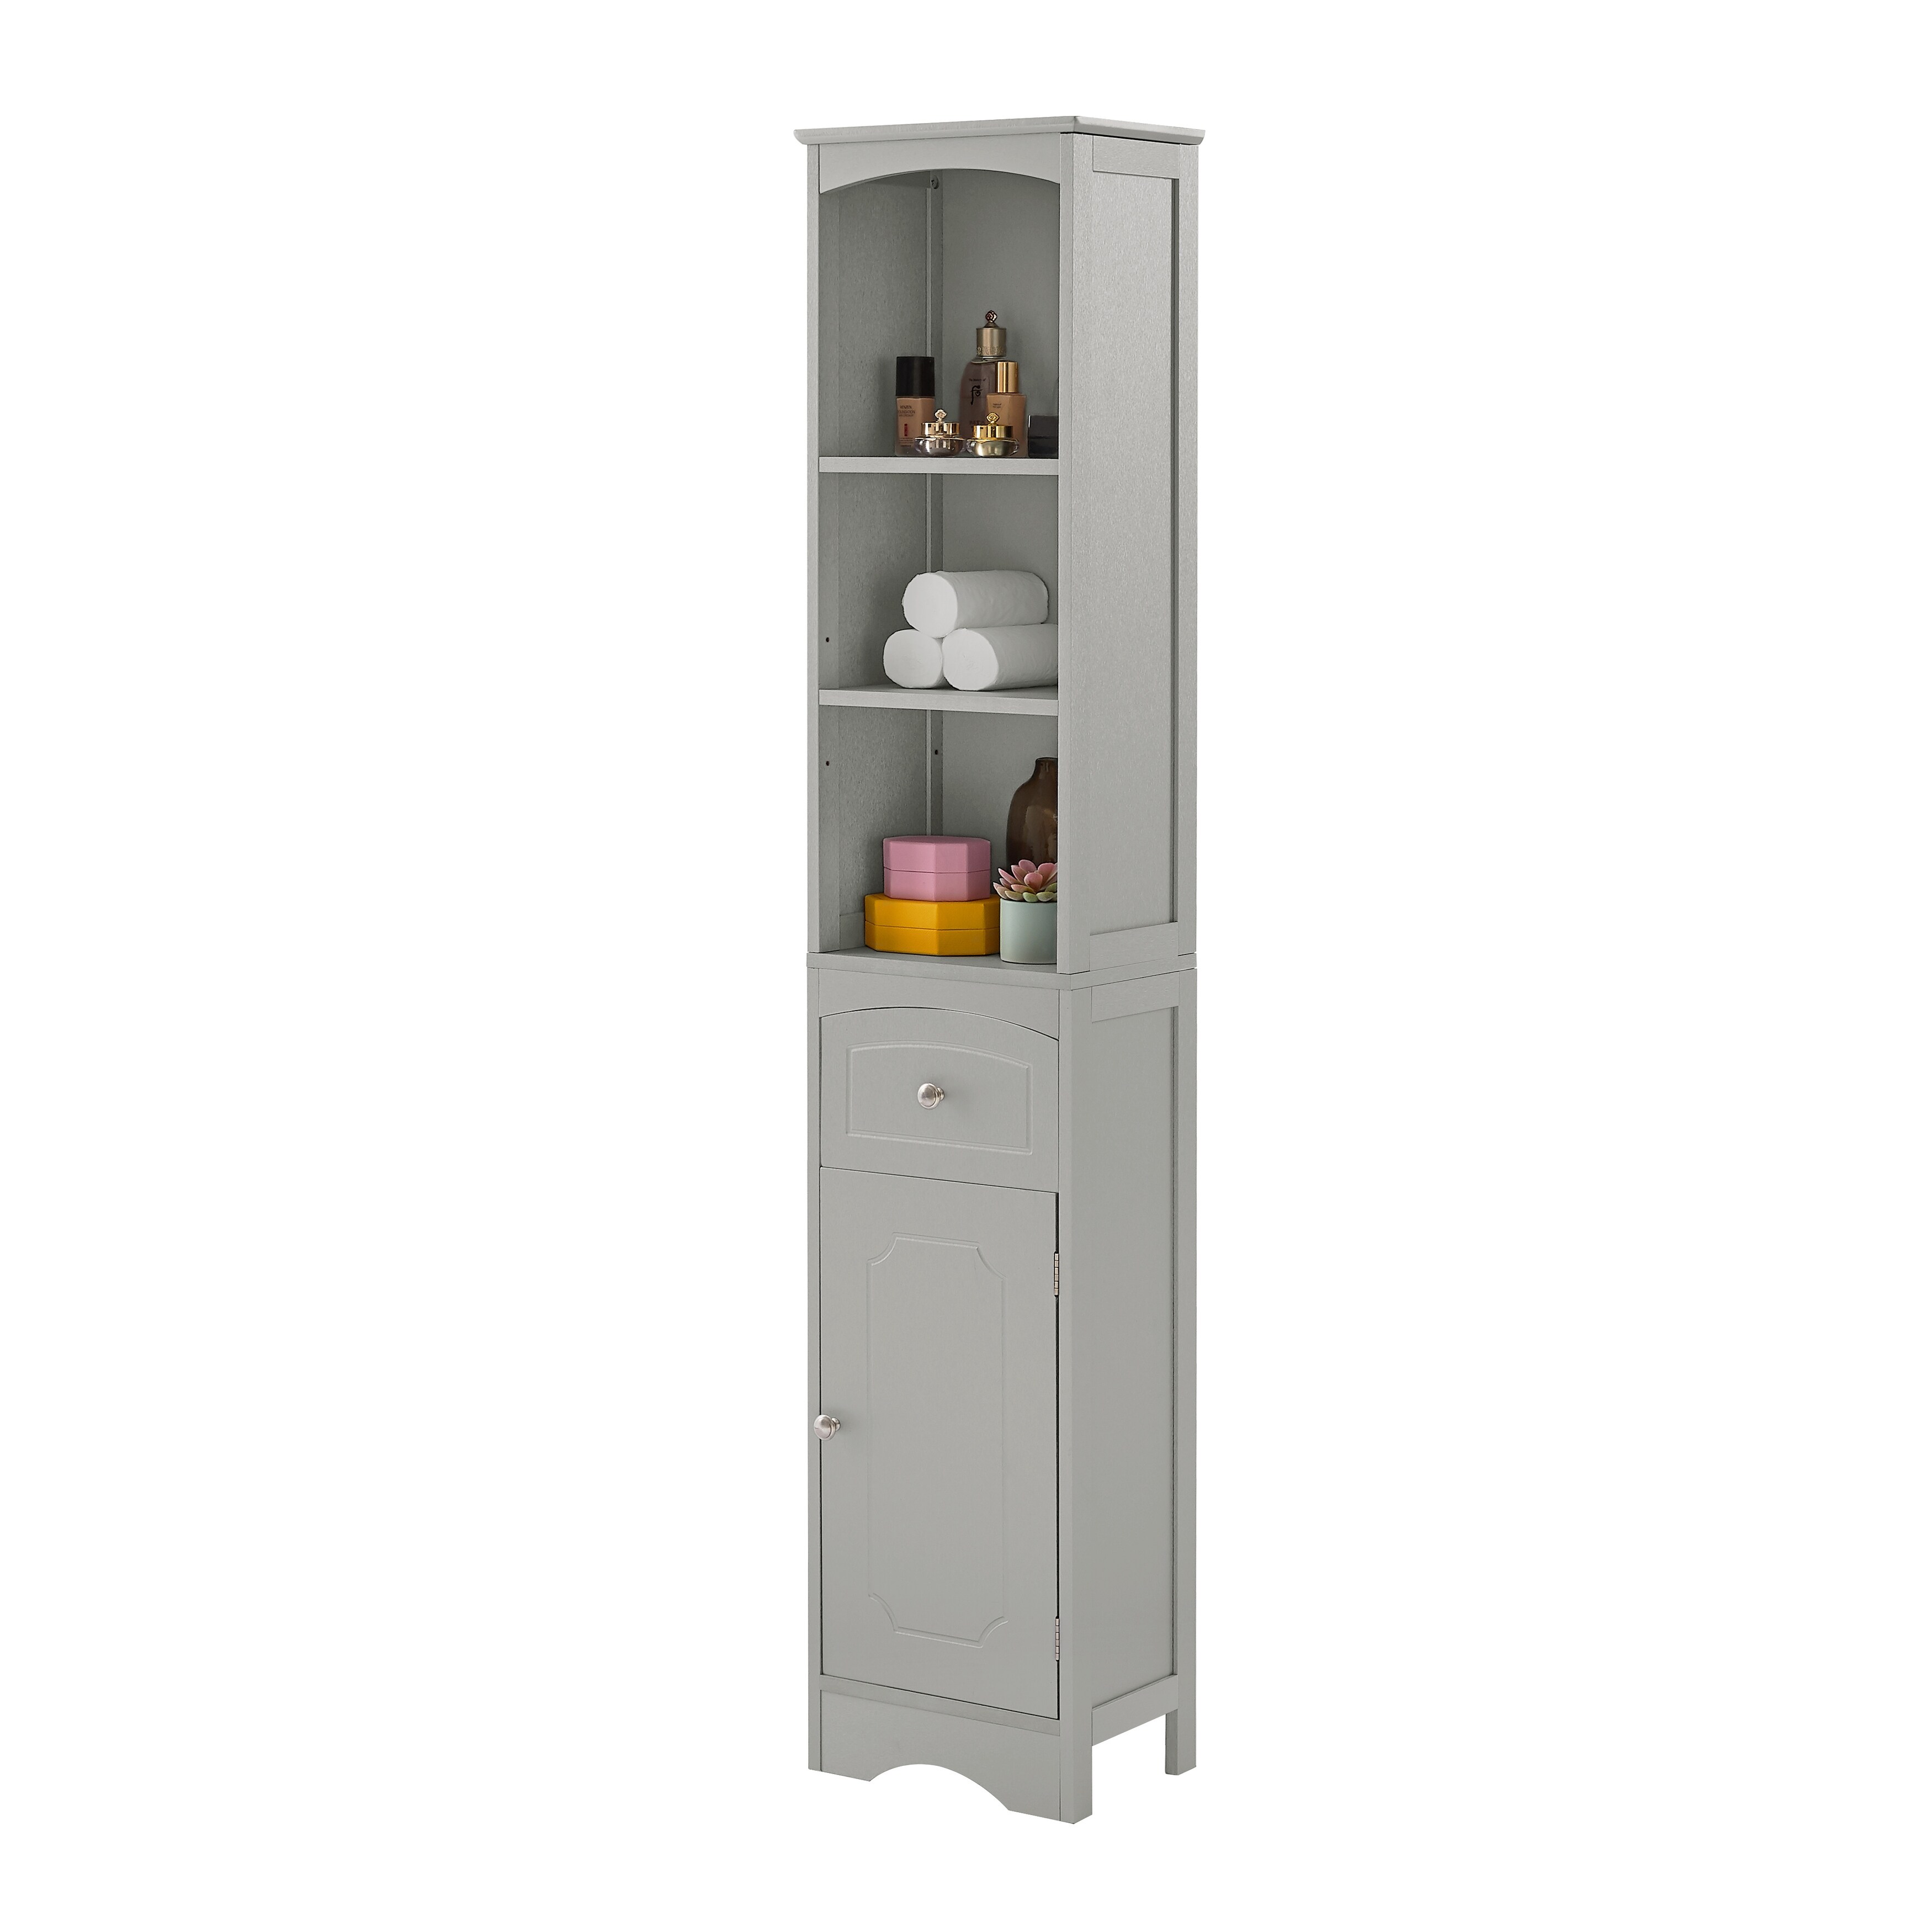 https://ak1.ostkcdn.com/images/products/is/images/direct/a4e8a8eb4d0cbc1e39f3ac1605cd8dd37c5b4db1/Modern-Design-Tall-Bathroom-Cabinet%2C-High-Quality-Freestanding-Storage-Cabinet-with-Drawer%2C-MDF-Board%2C-Adjustable-Shelf.jpg